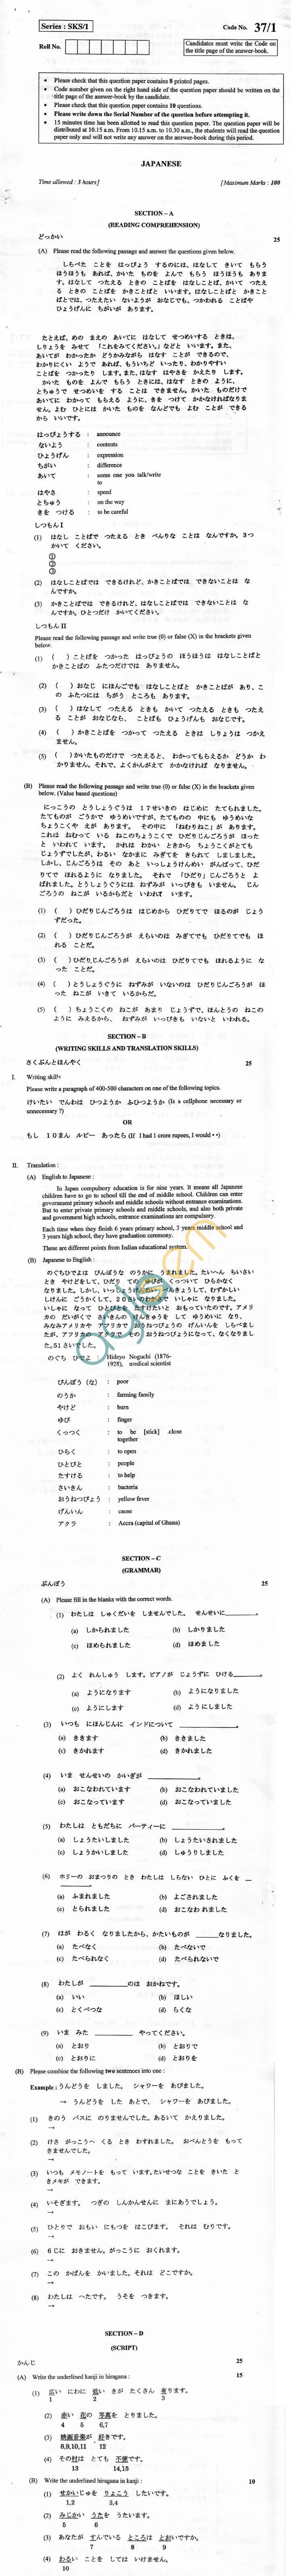 CBSE Board Exam 2013 Class XII Question Paper - Japanese